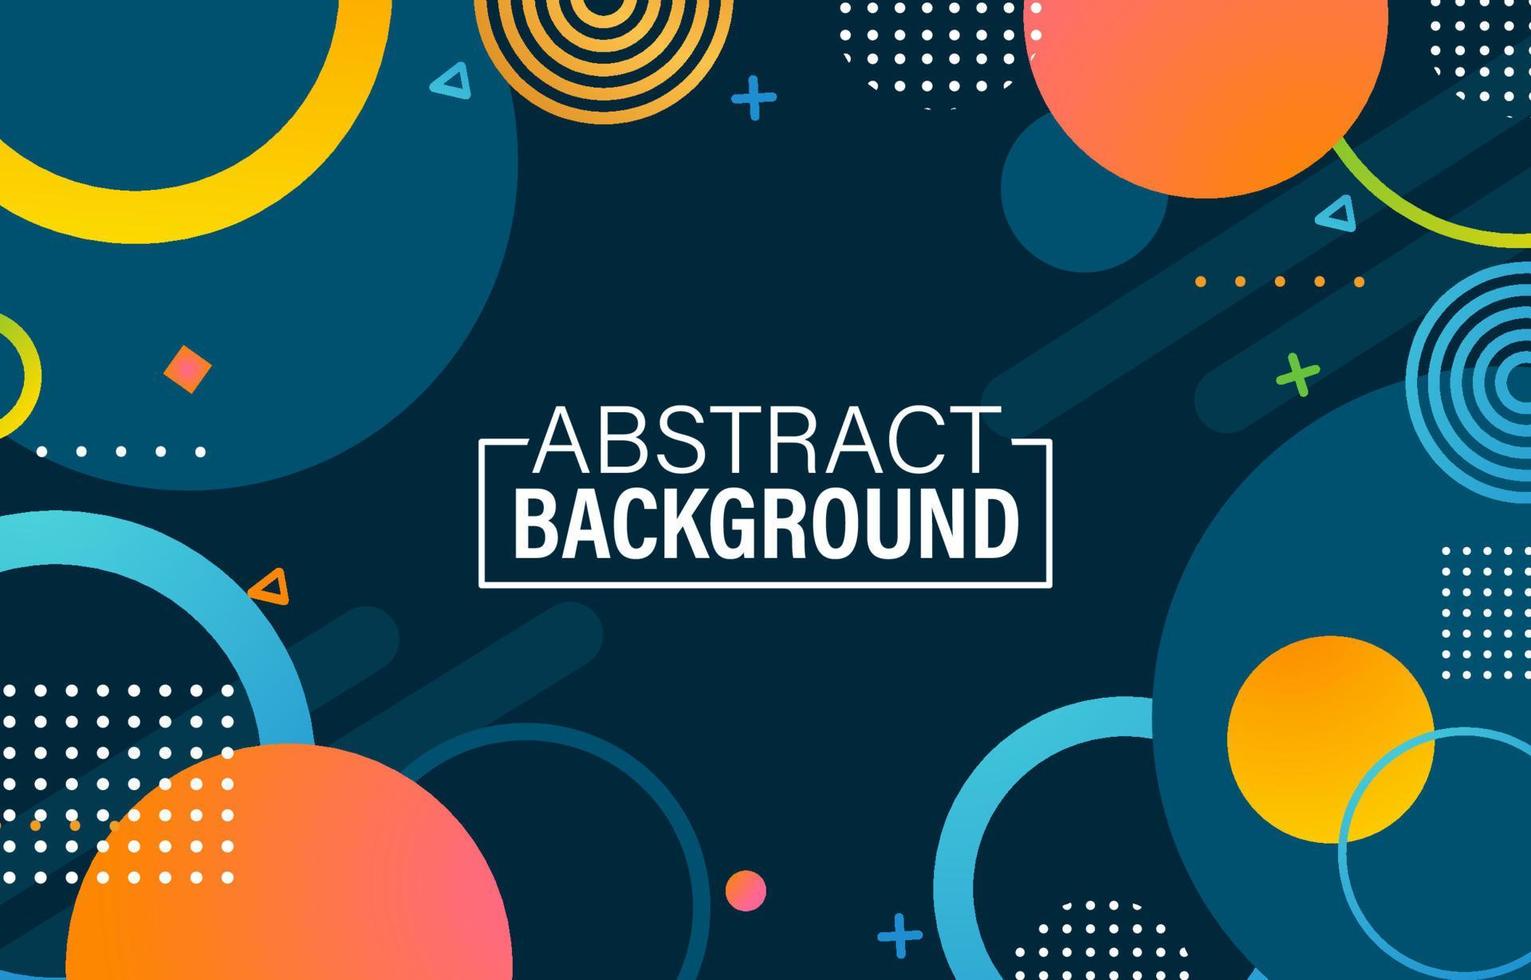 Abstract Flat Geometric Background vector